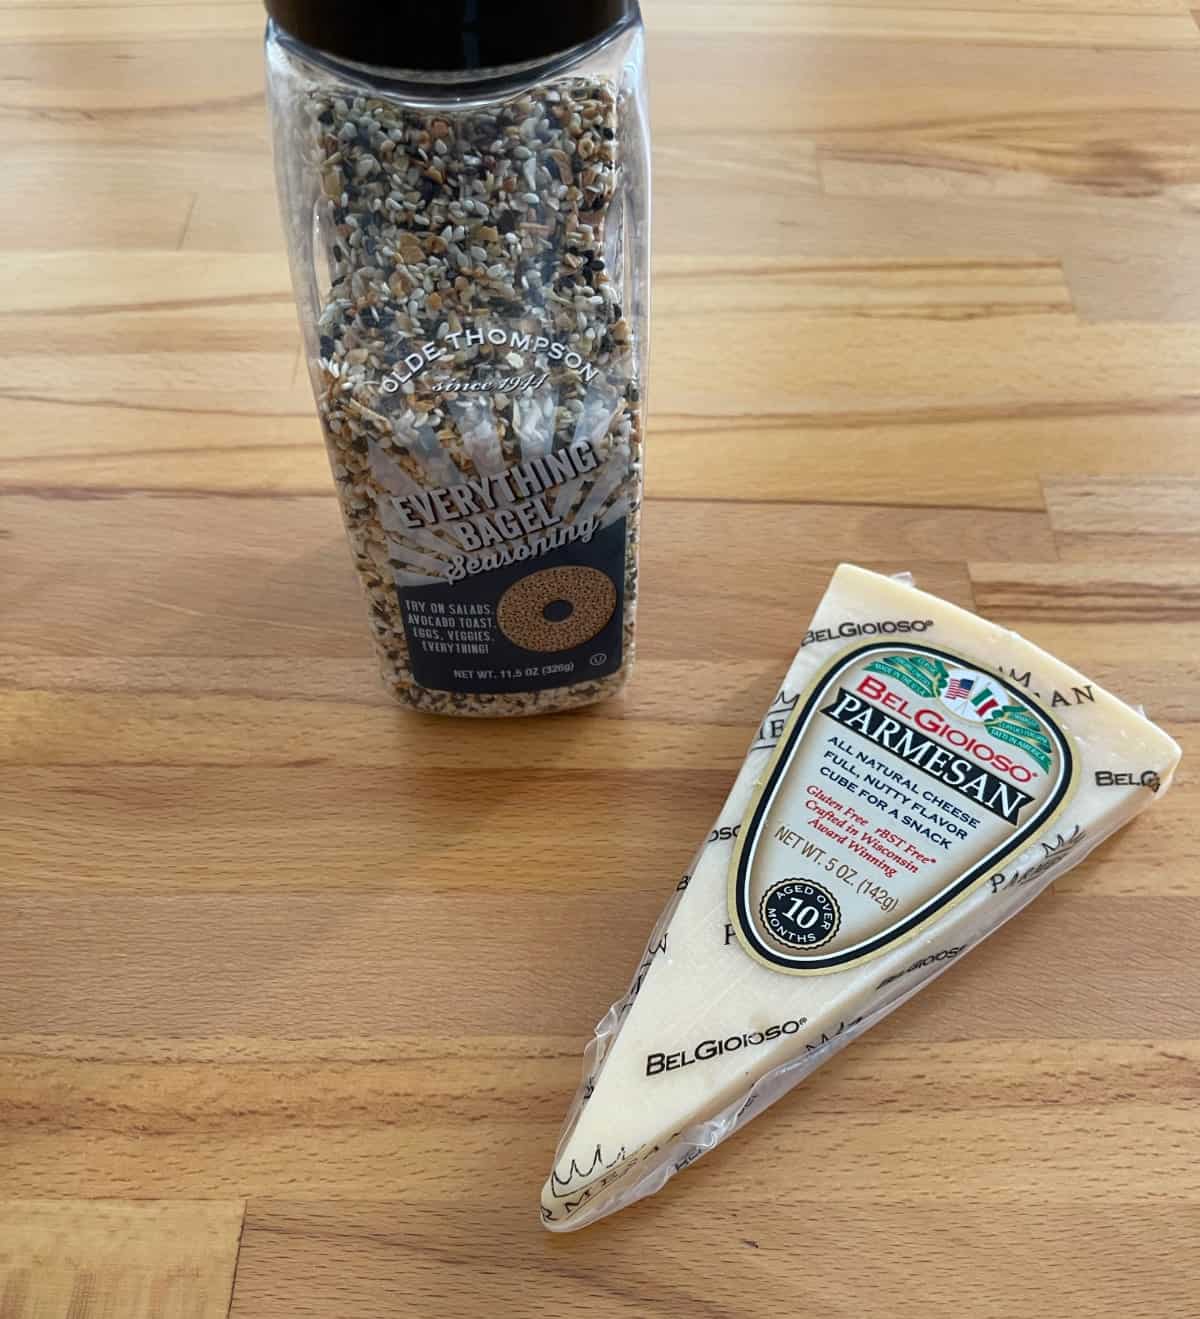 Everything Bagel seasoning and Parmesan cheese wedge on wooden table.